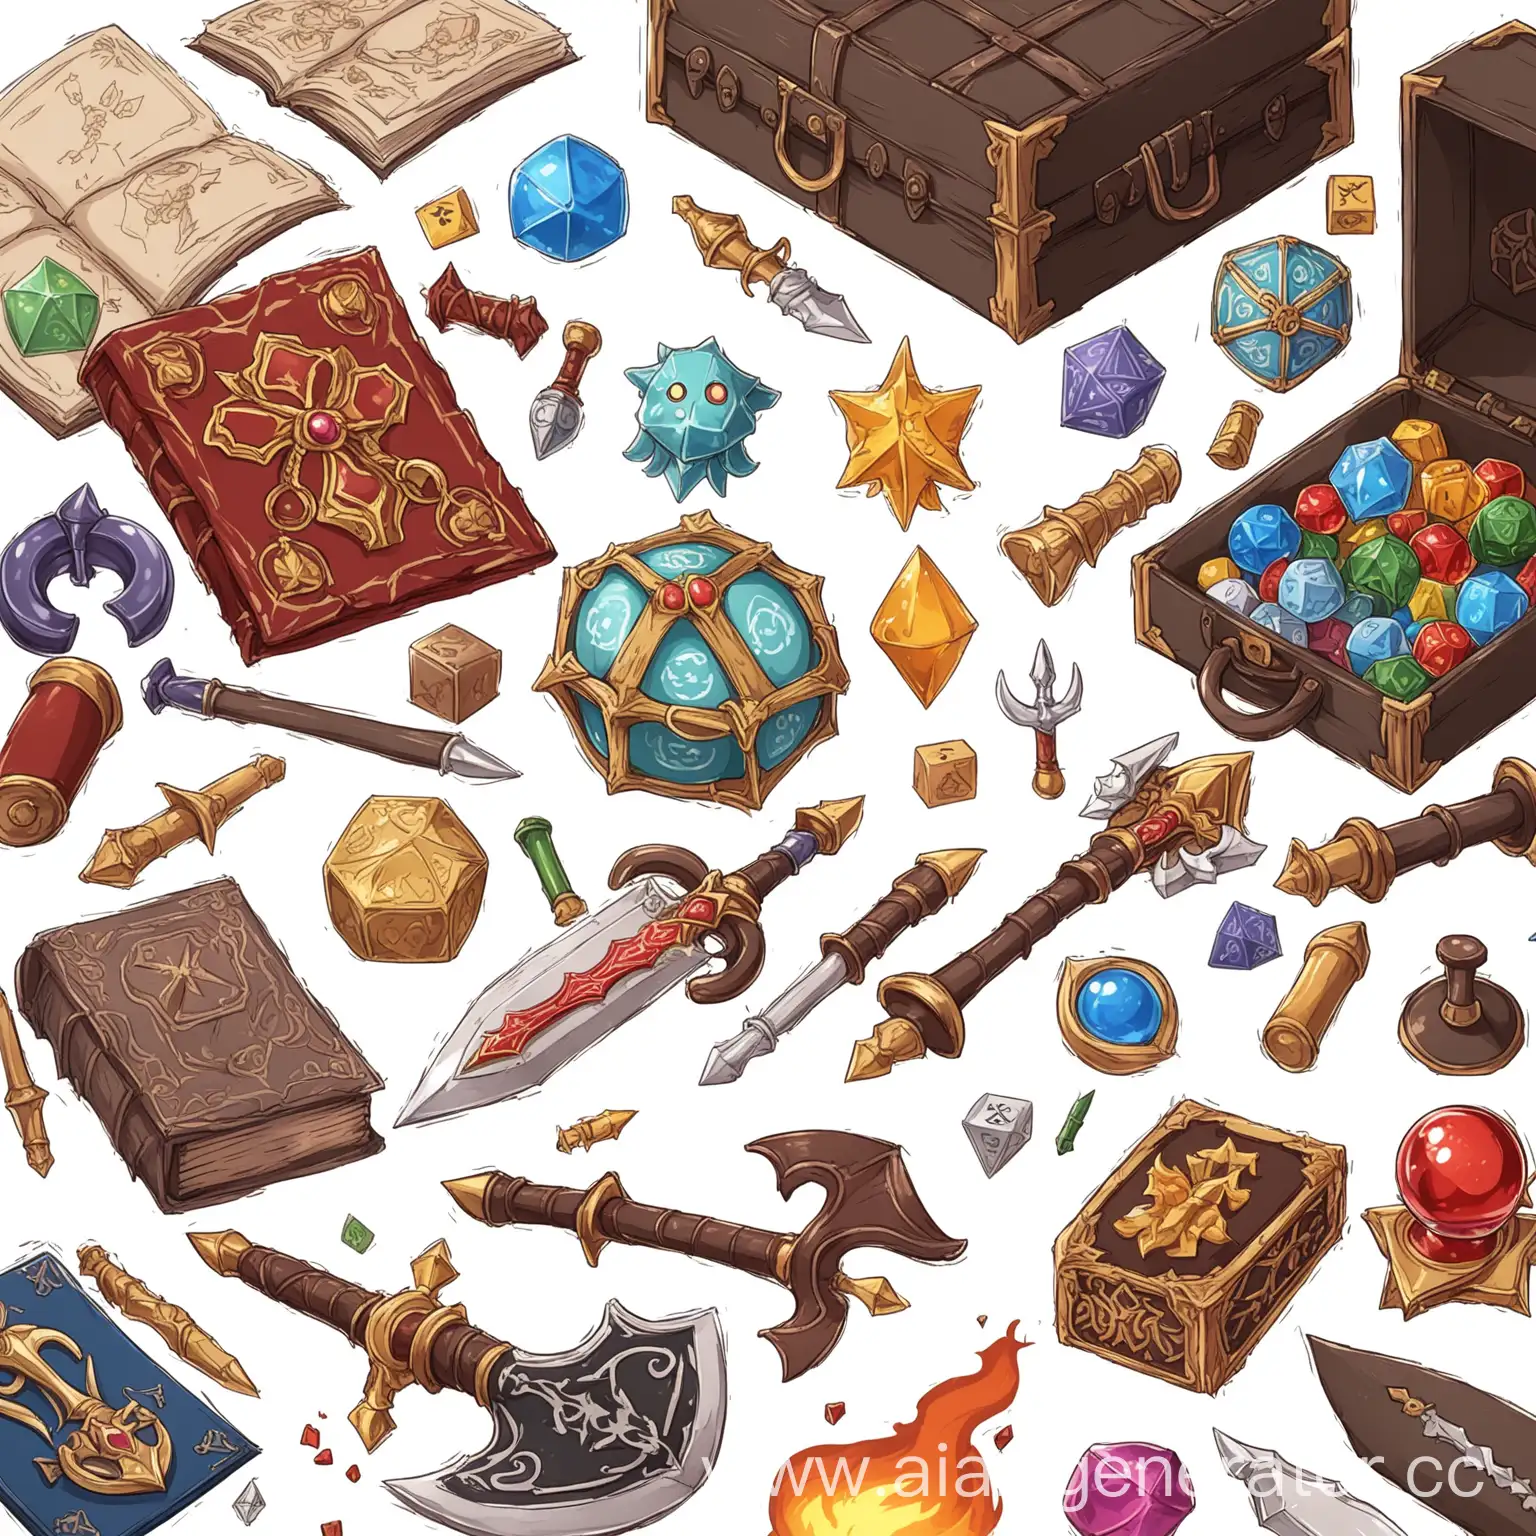 Cute-Anime-RPG-Artifacts-Illustration-on-White-Background